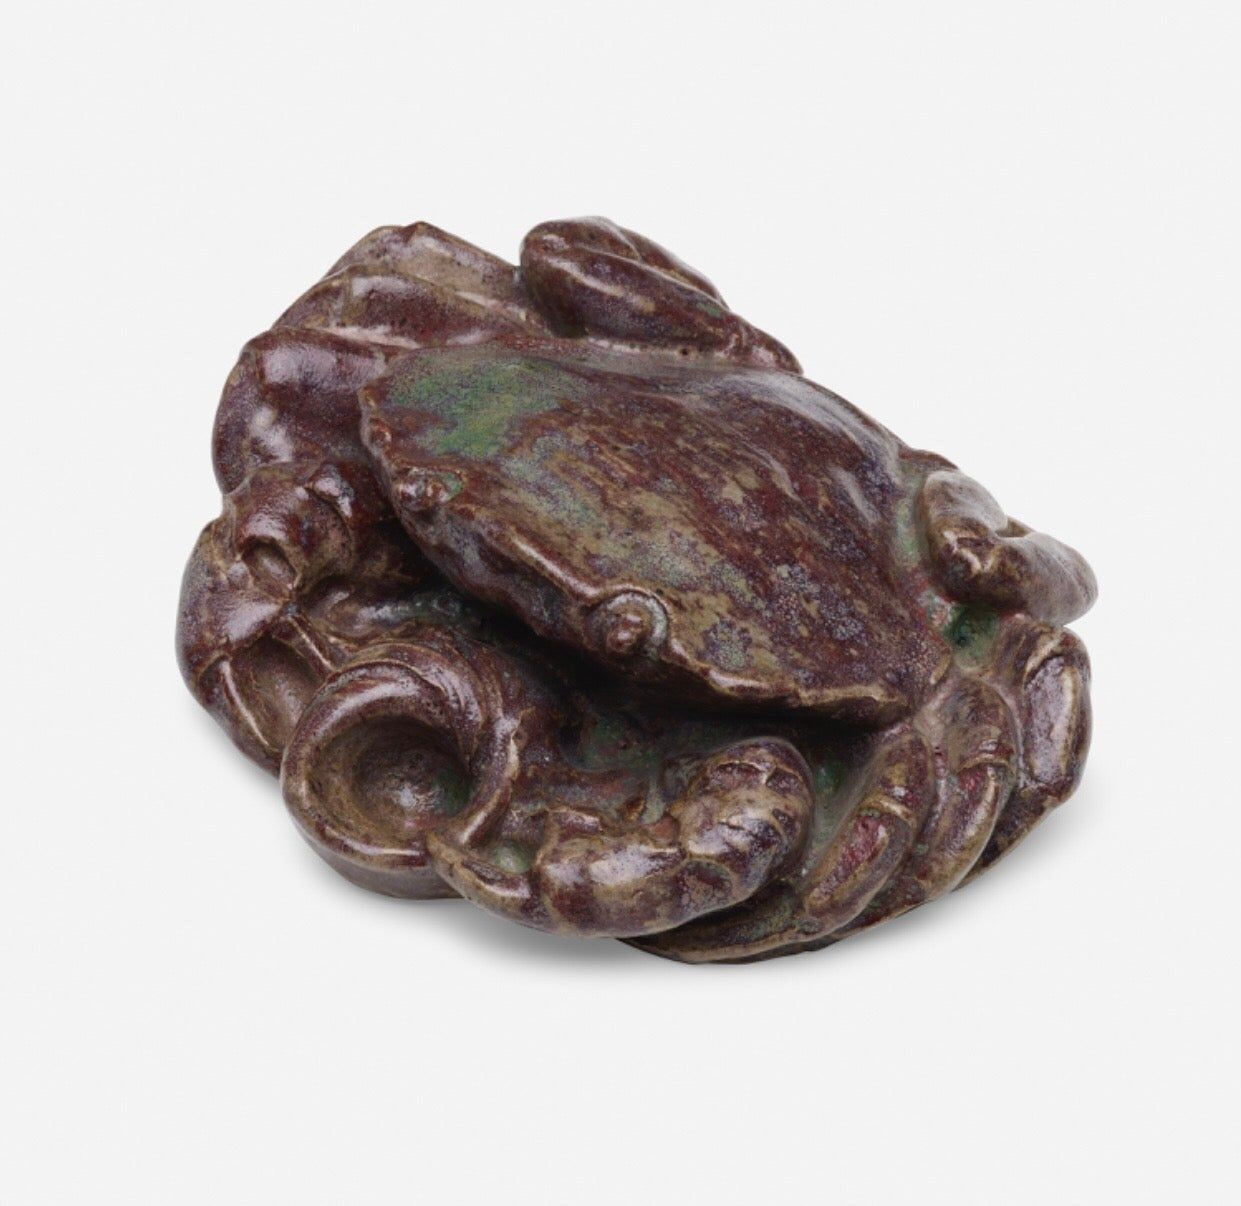 Glazed Earthenware Inkwell of a Crab, Signed Andre Methey, France c. 1900